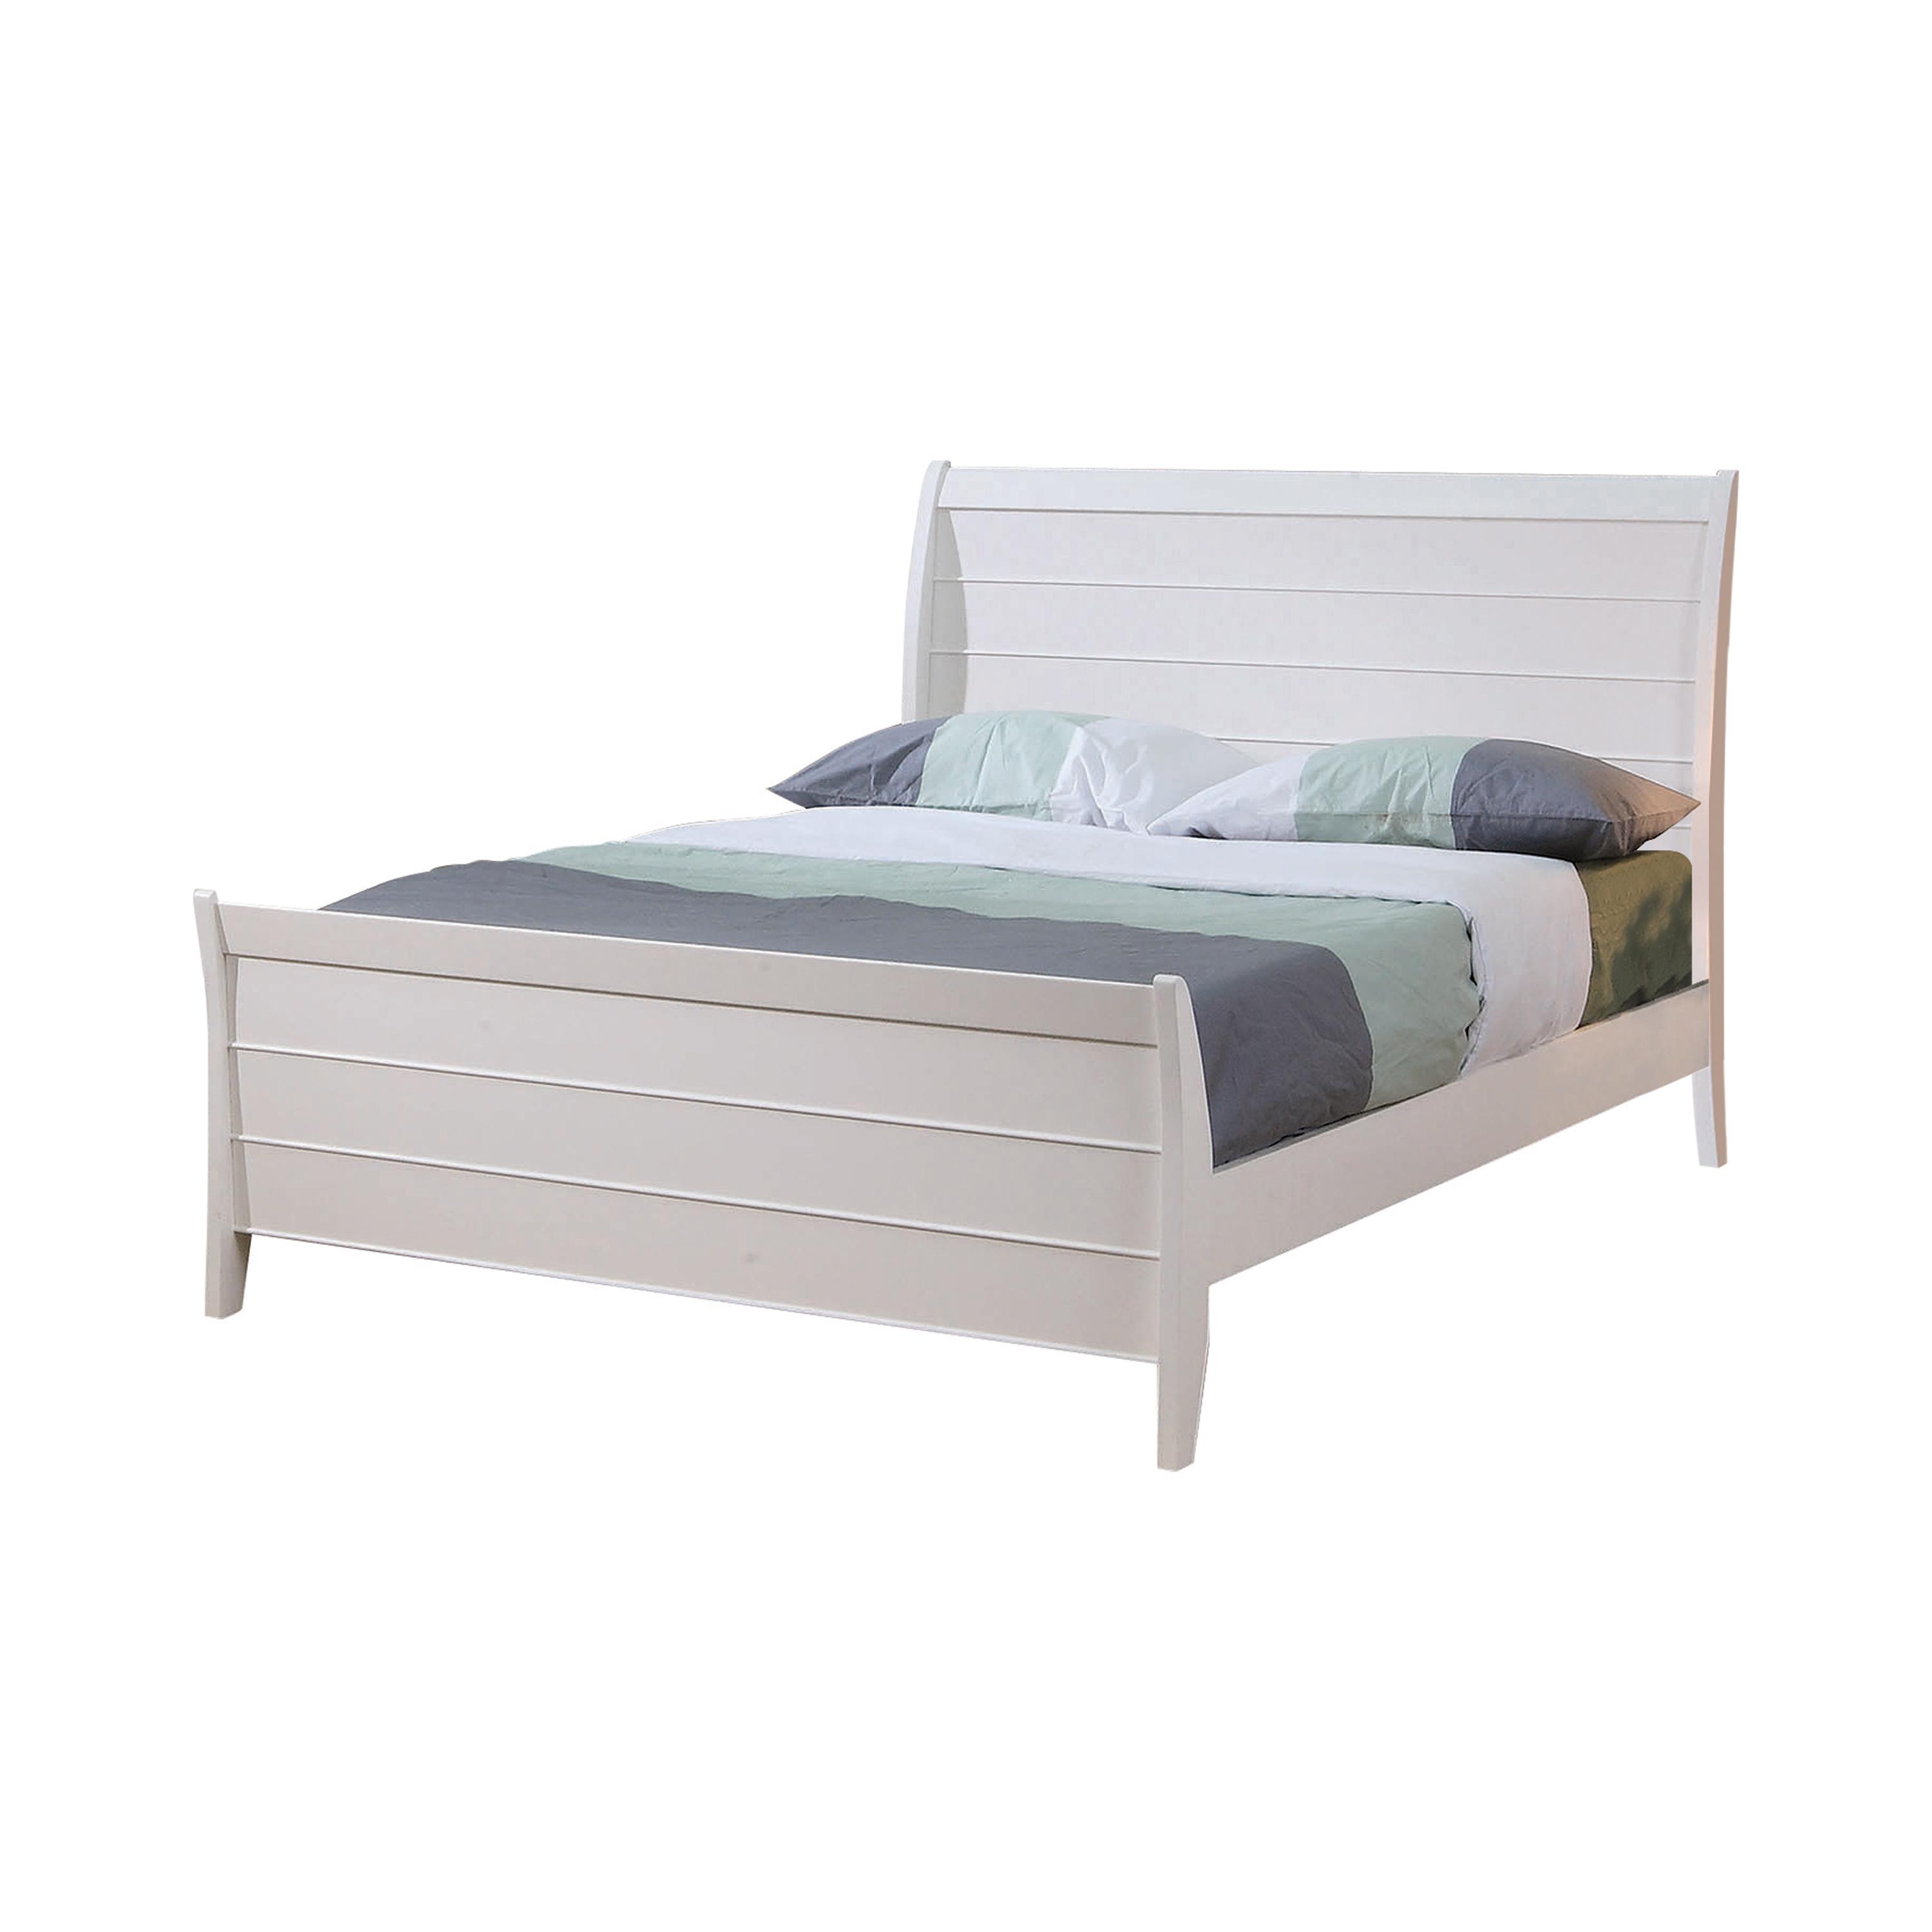 Cottage Bed 400231F Selena 400231F in White 